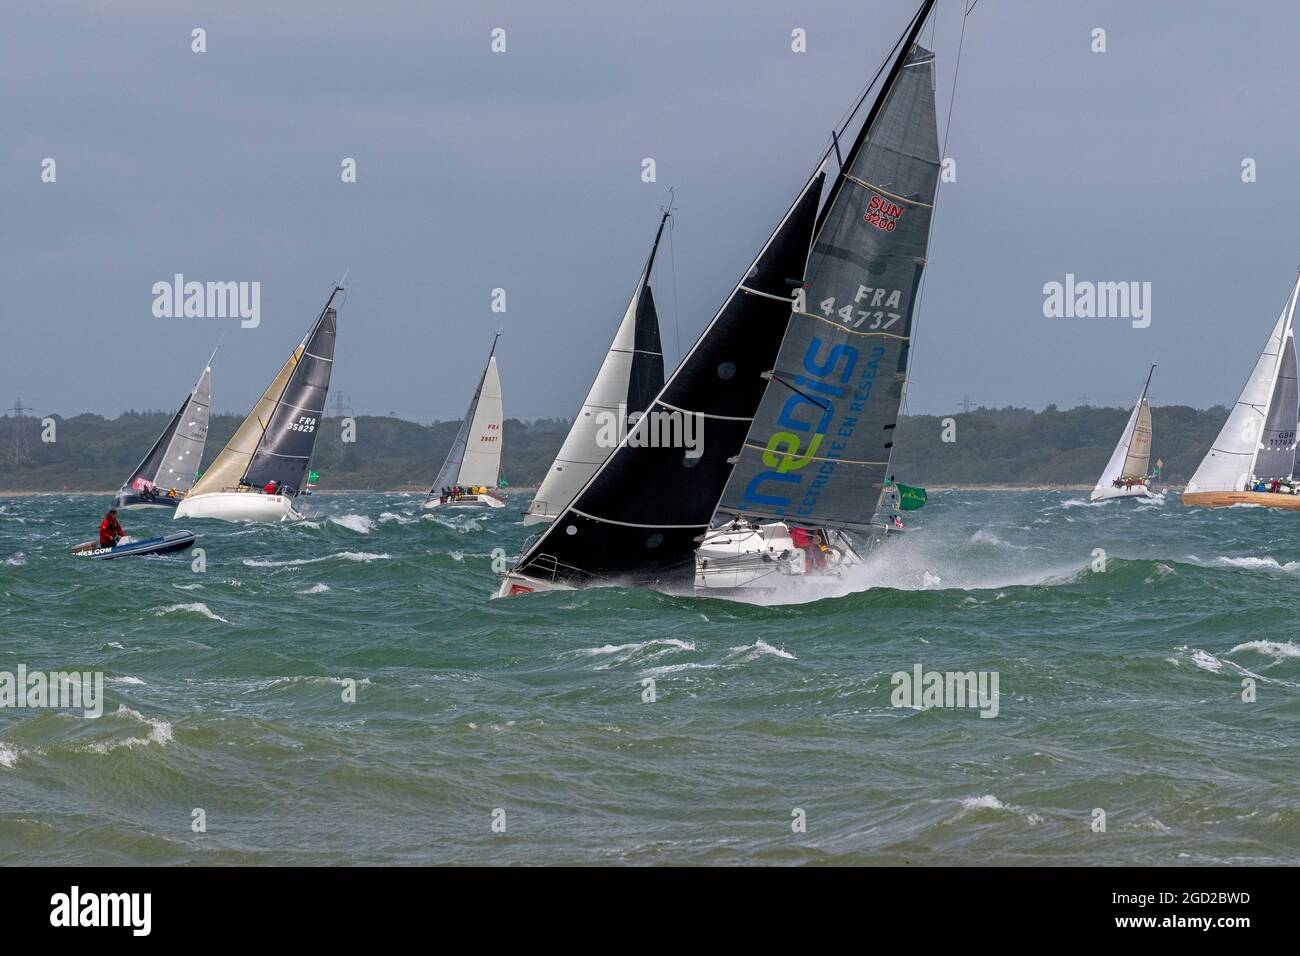 Start of the Rolex Fastnet Race on 8 August 2021. The competitors faced gruelling conditions with high westerly winds.  Cowes, Isle of Wight, England Stock Photo